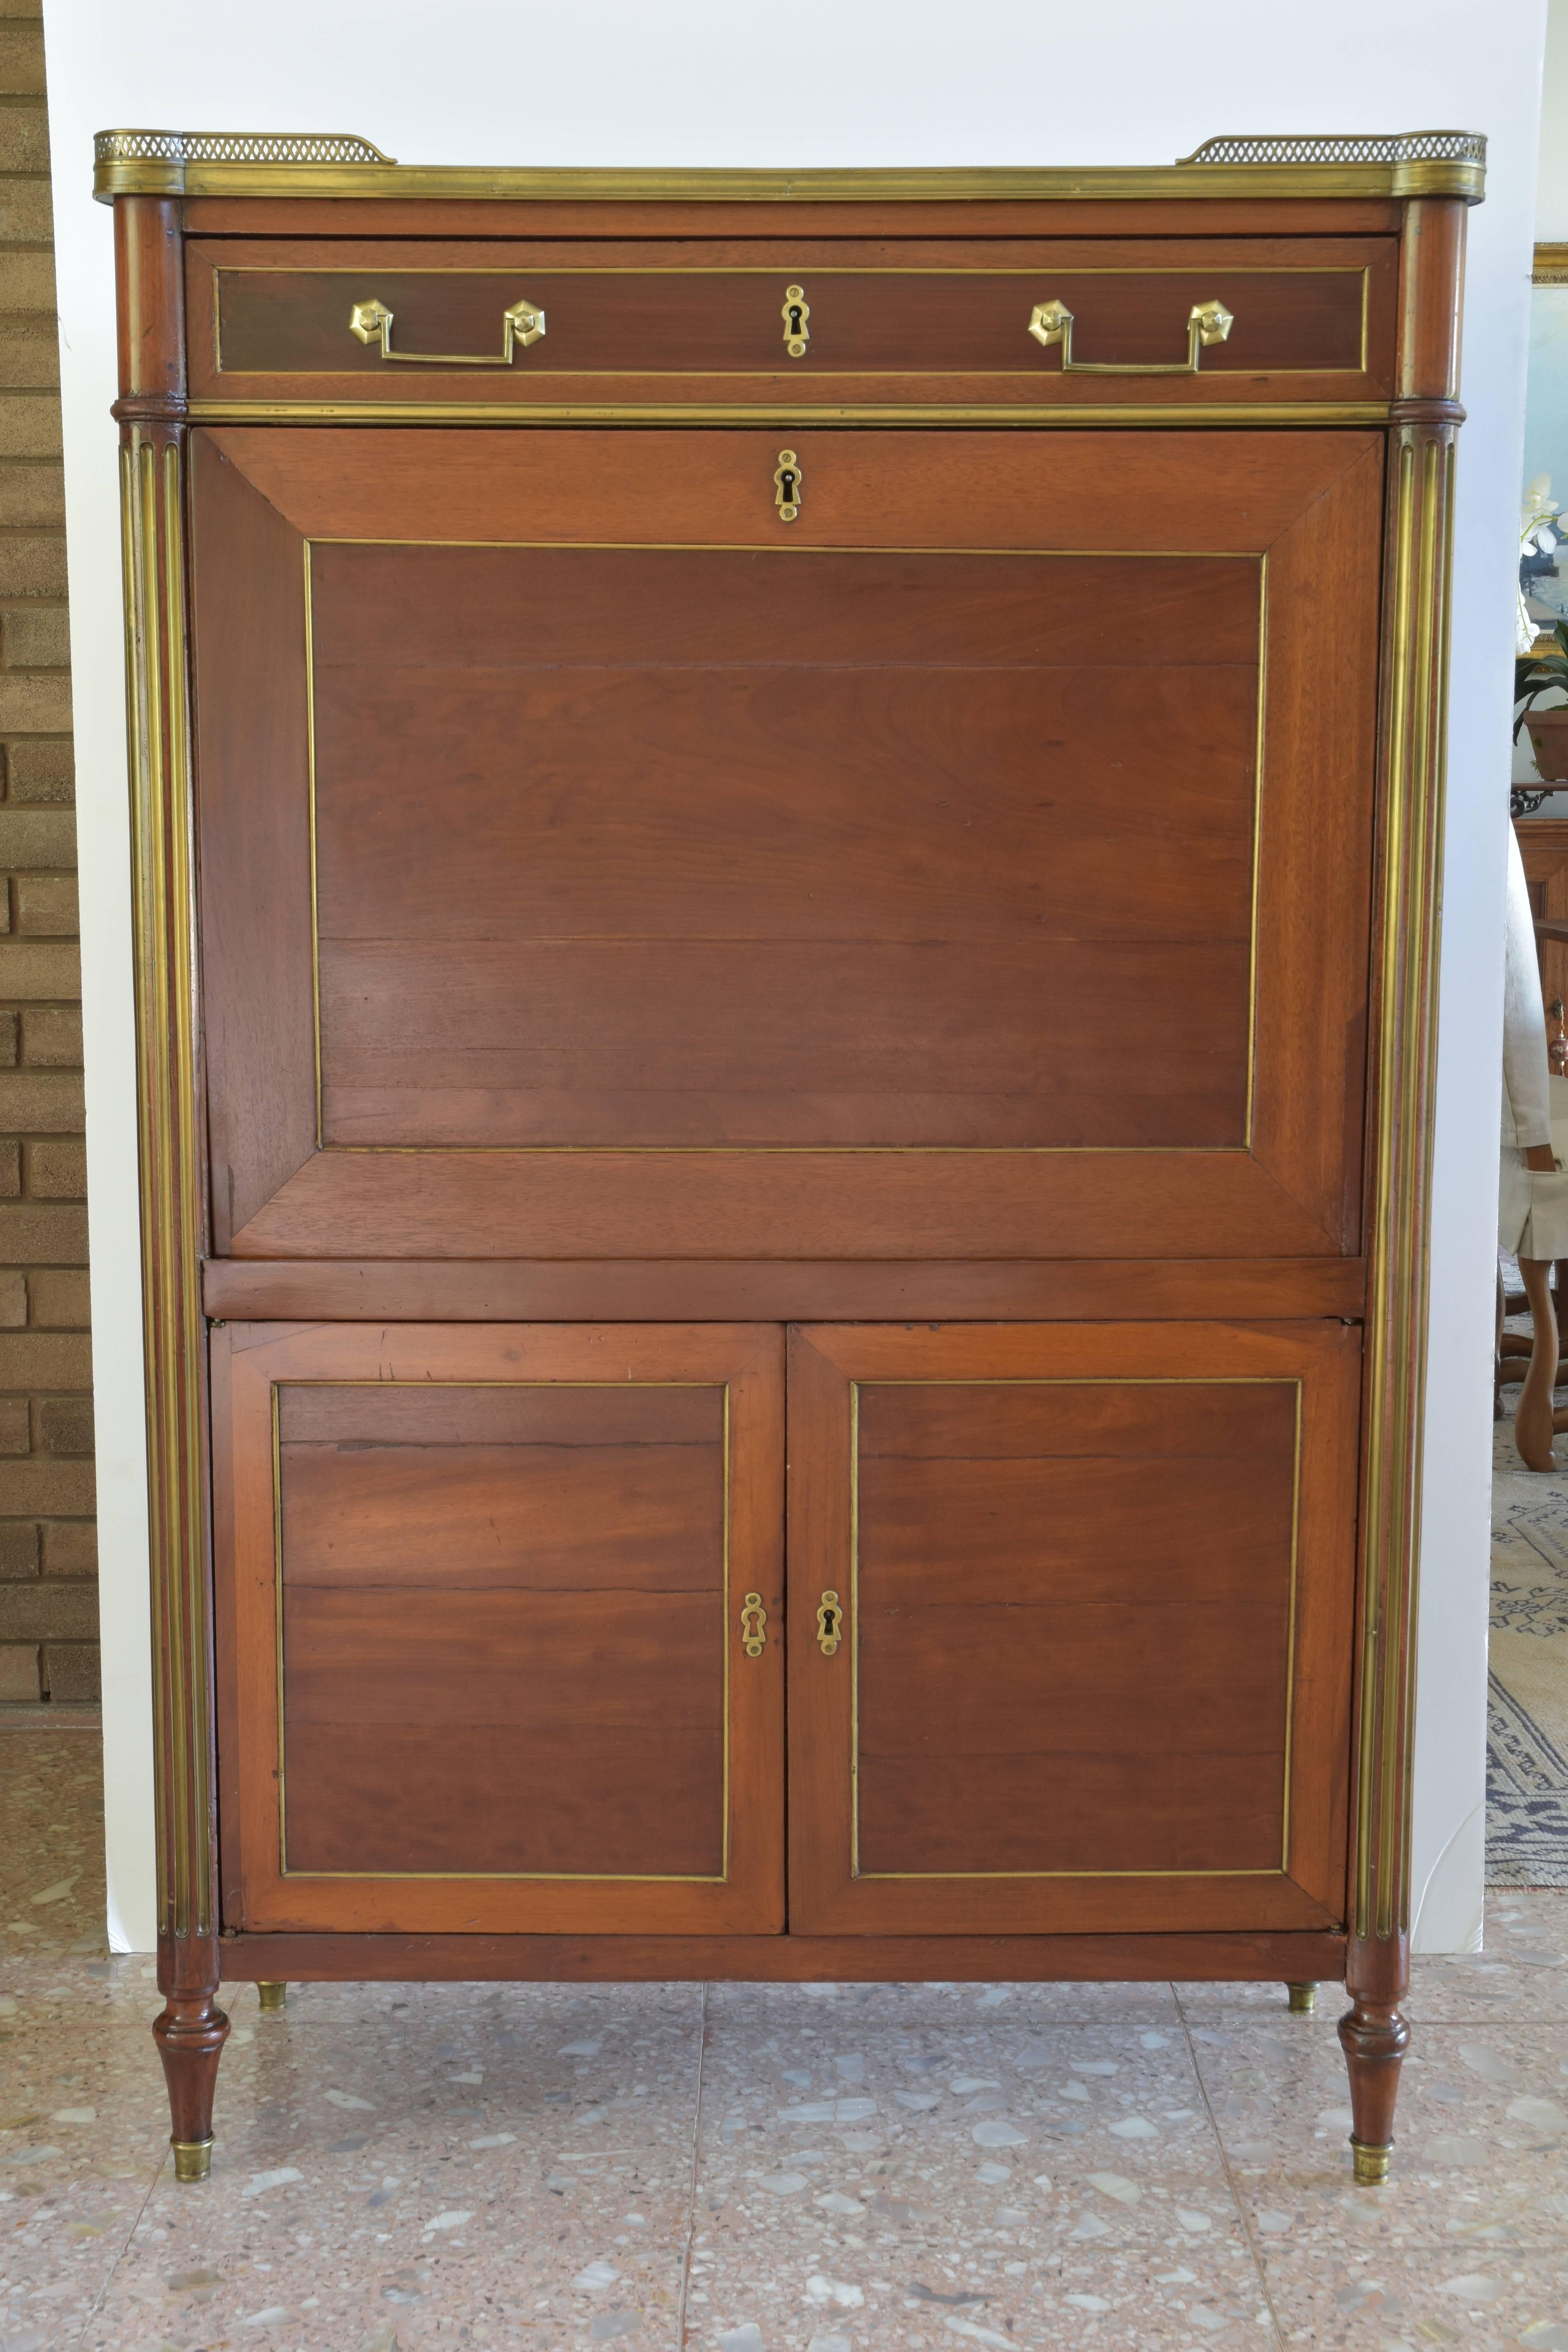 Elegant and highly functional French drop front mahogany secretary with original leather writing surface. This piece features a finely detailed bronze gallery with an inset marble top and a single drawer above the drop front desk. The interior is